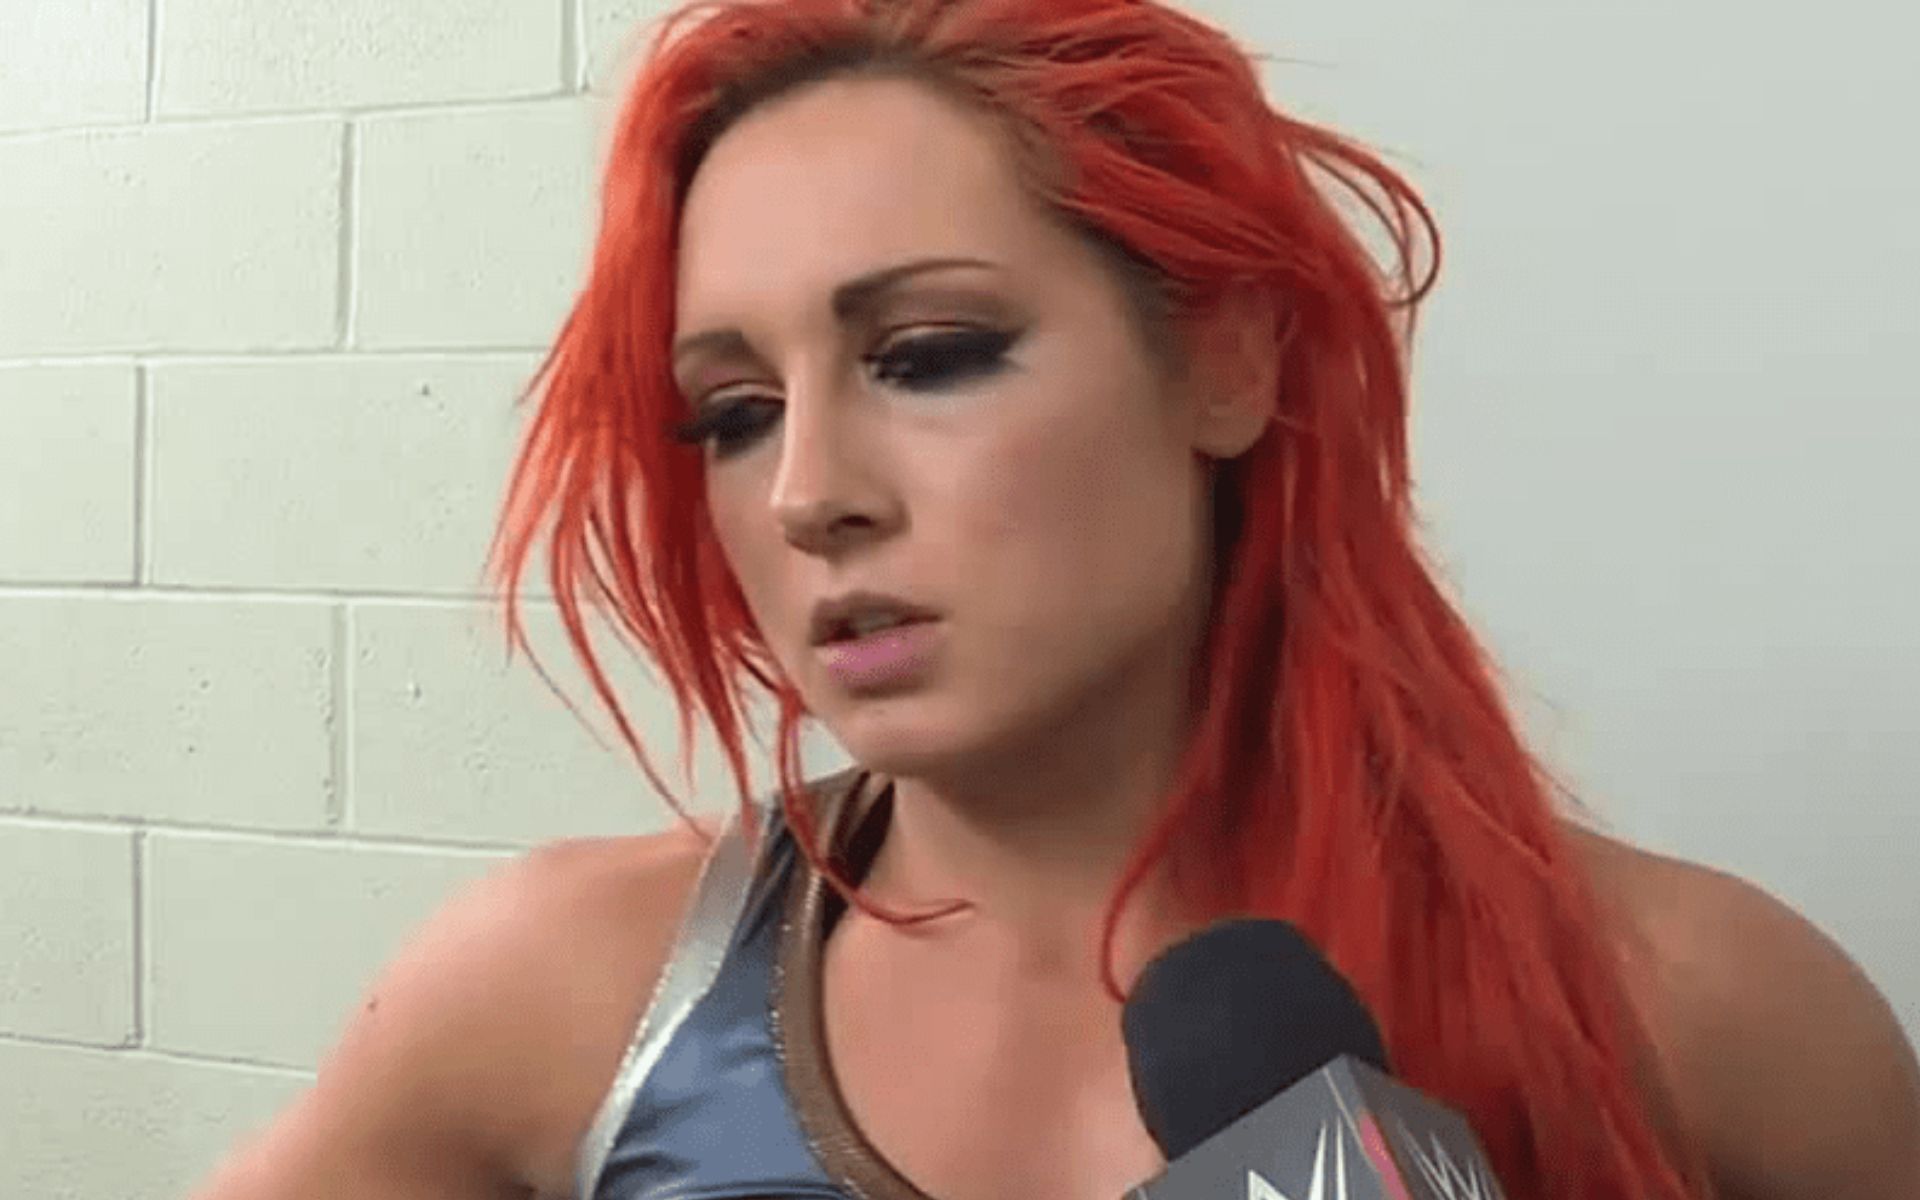 Becky Lynch has been one of the top names in the wrestling business